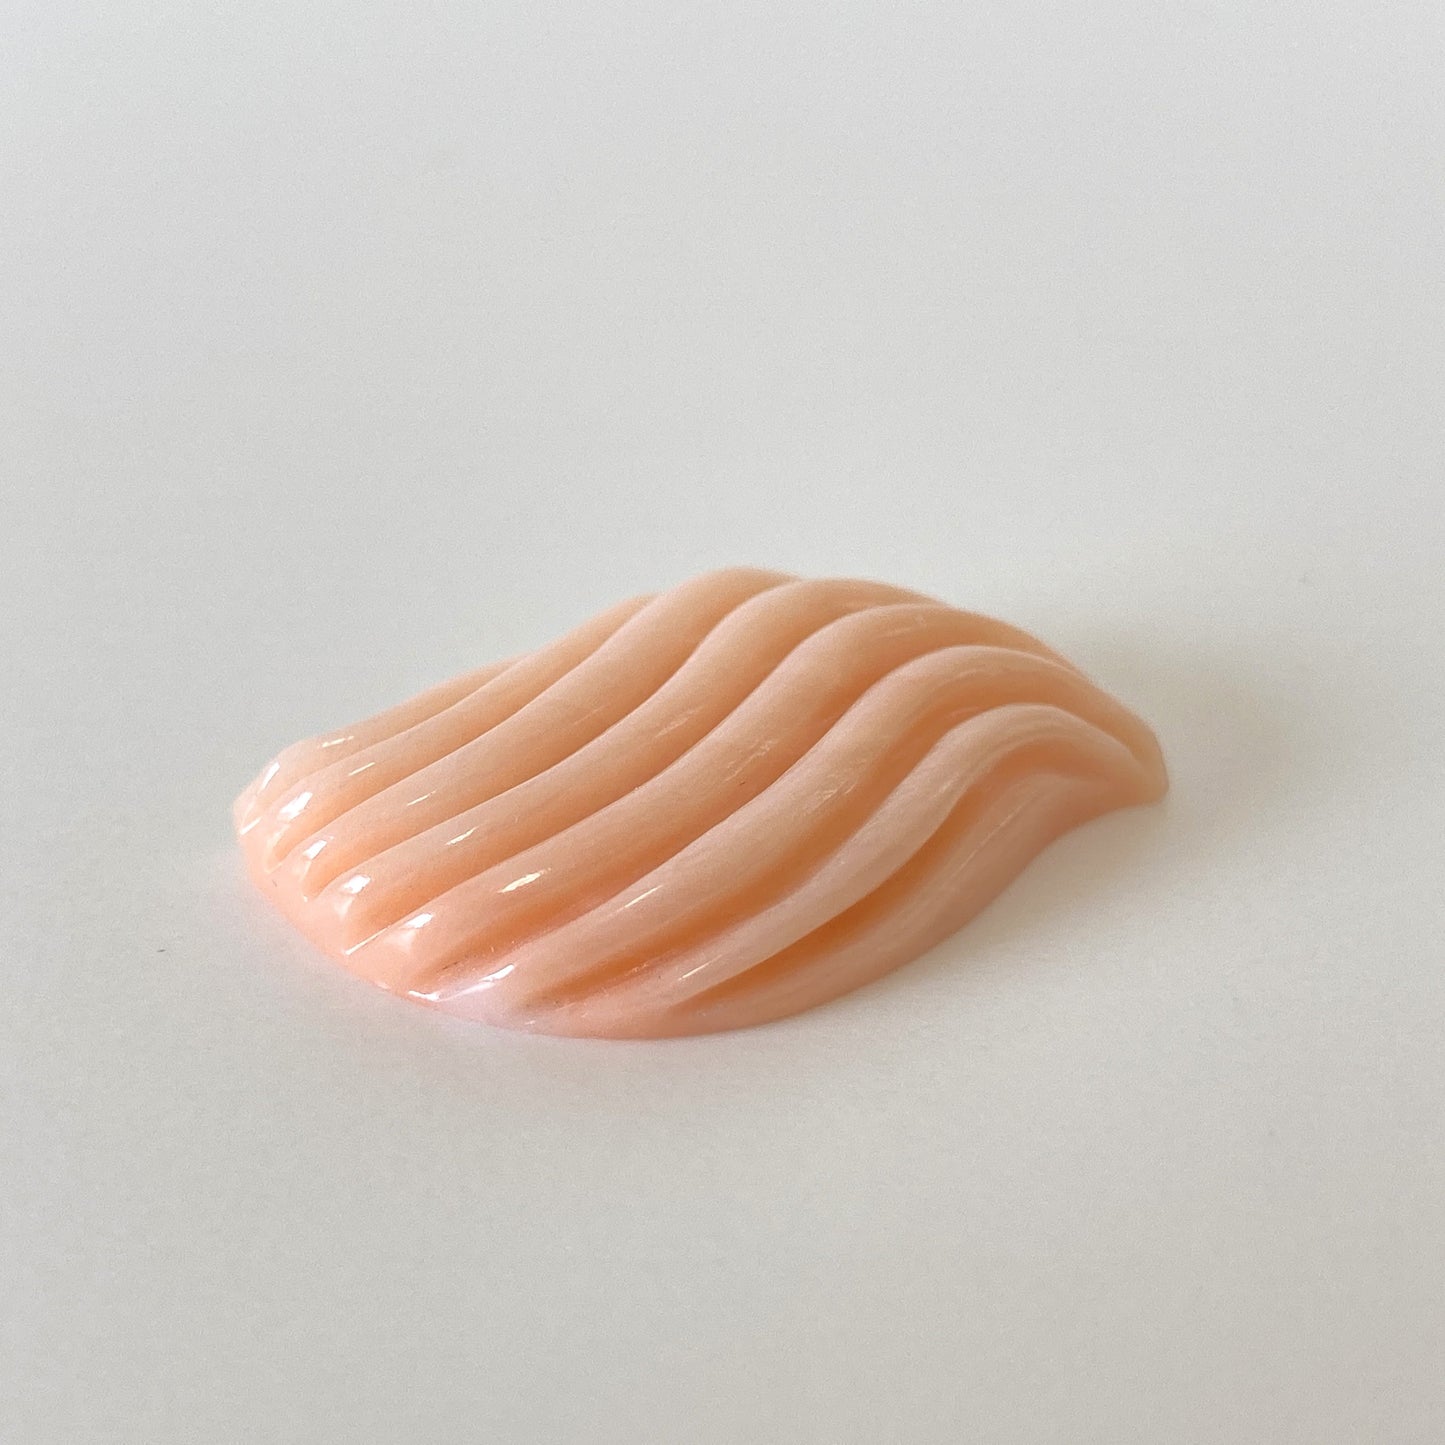 Pink angel skin coral loose, Hand Carved Unique shape Angel-skin color coral, Genuine Undyed Pink Coral for Jewelry making,24.4x16.9mm